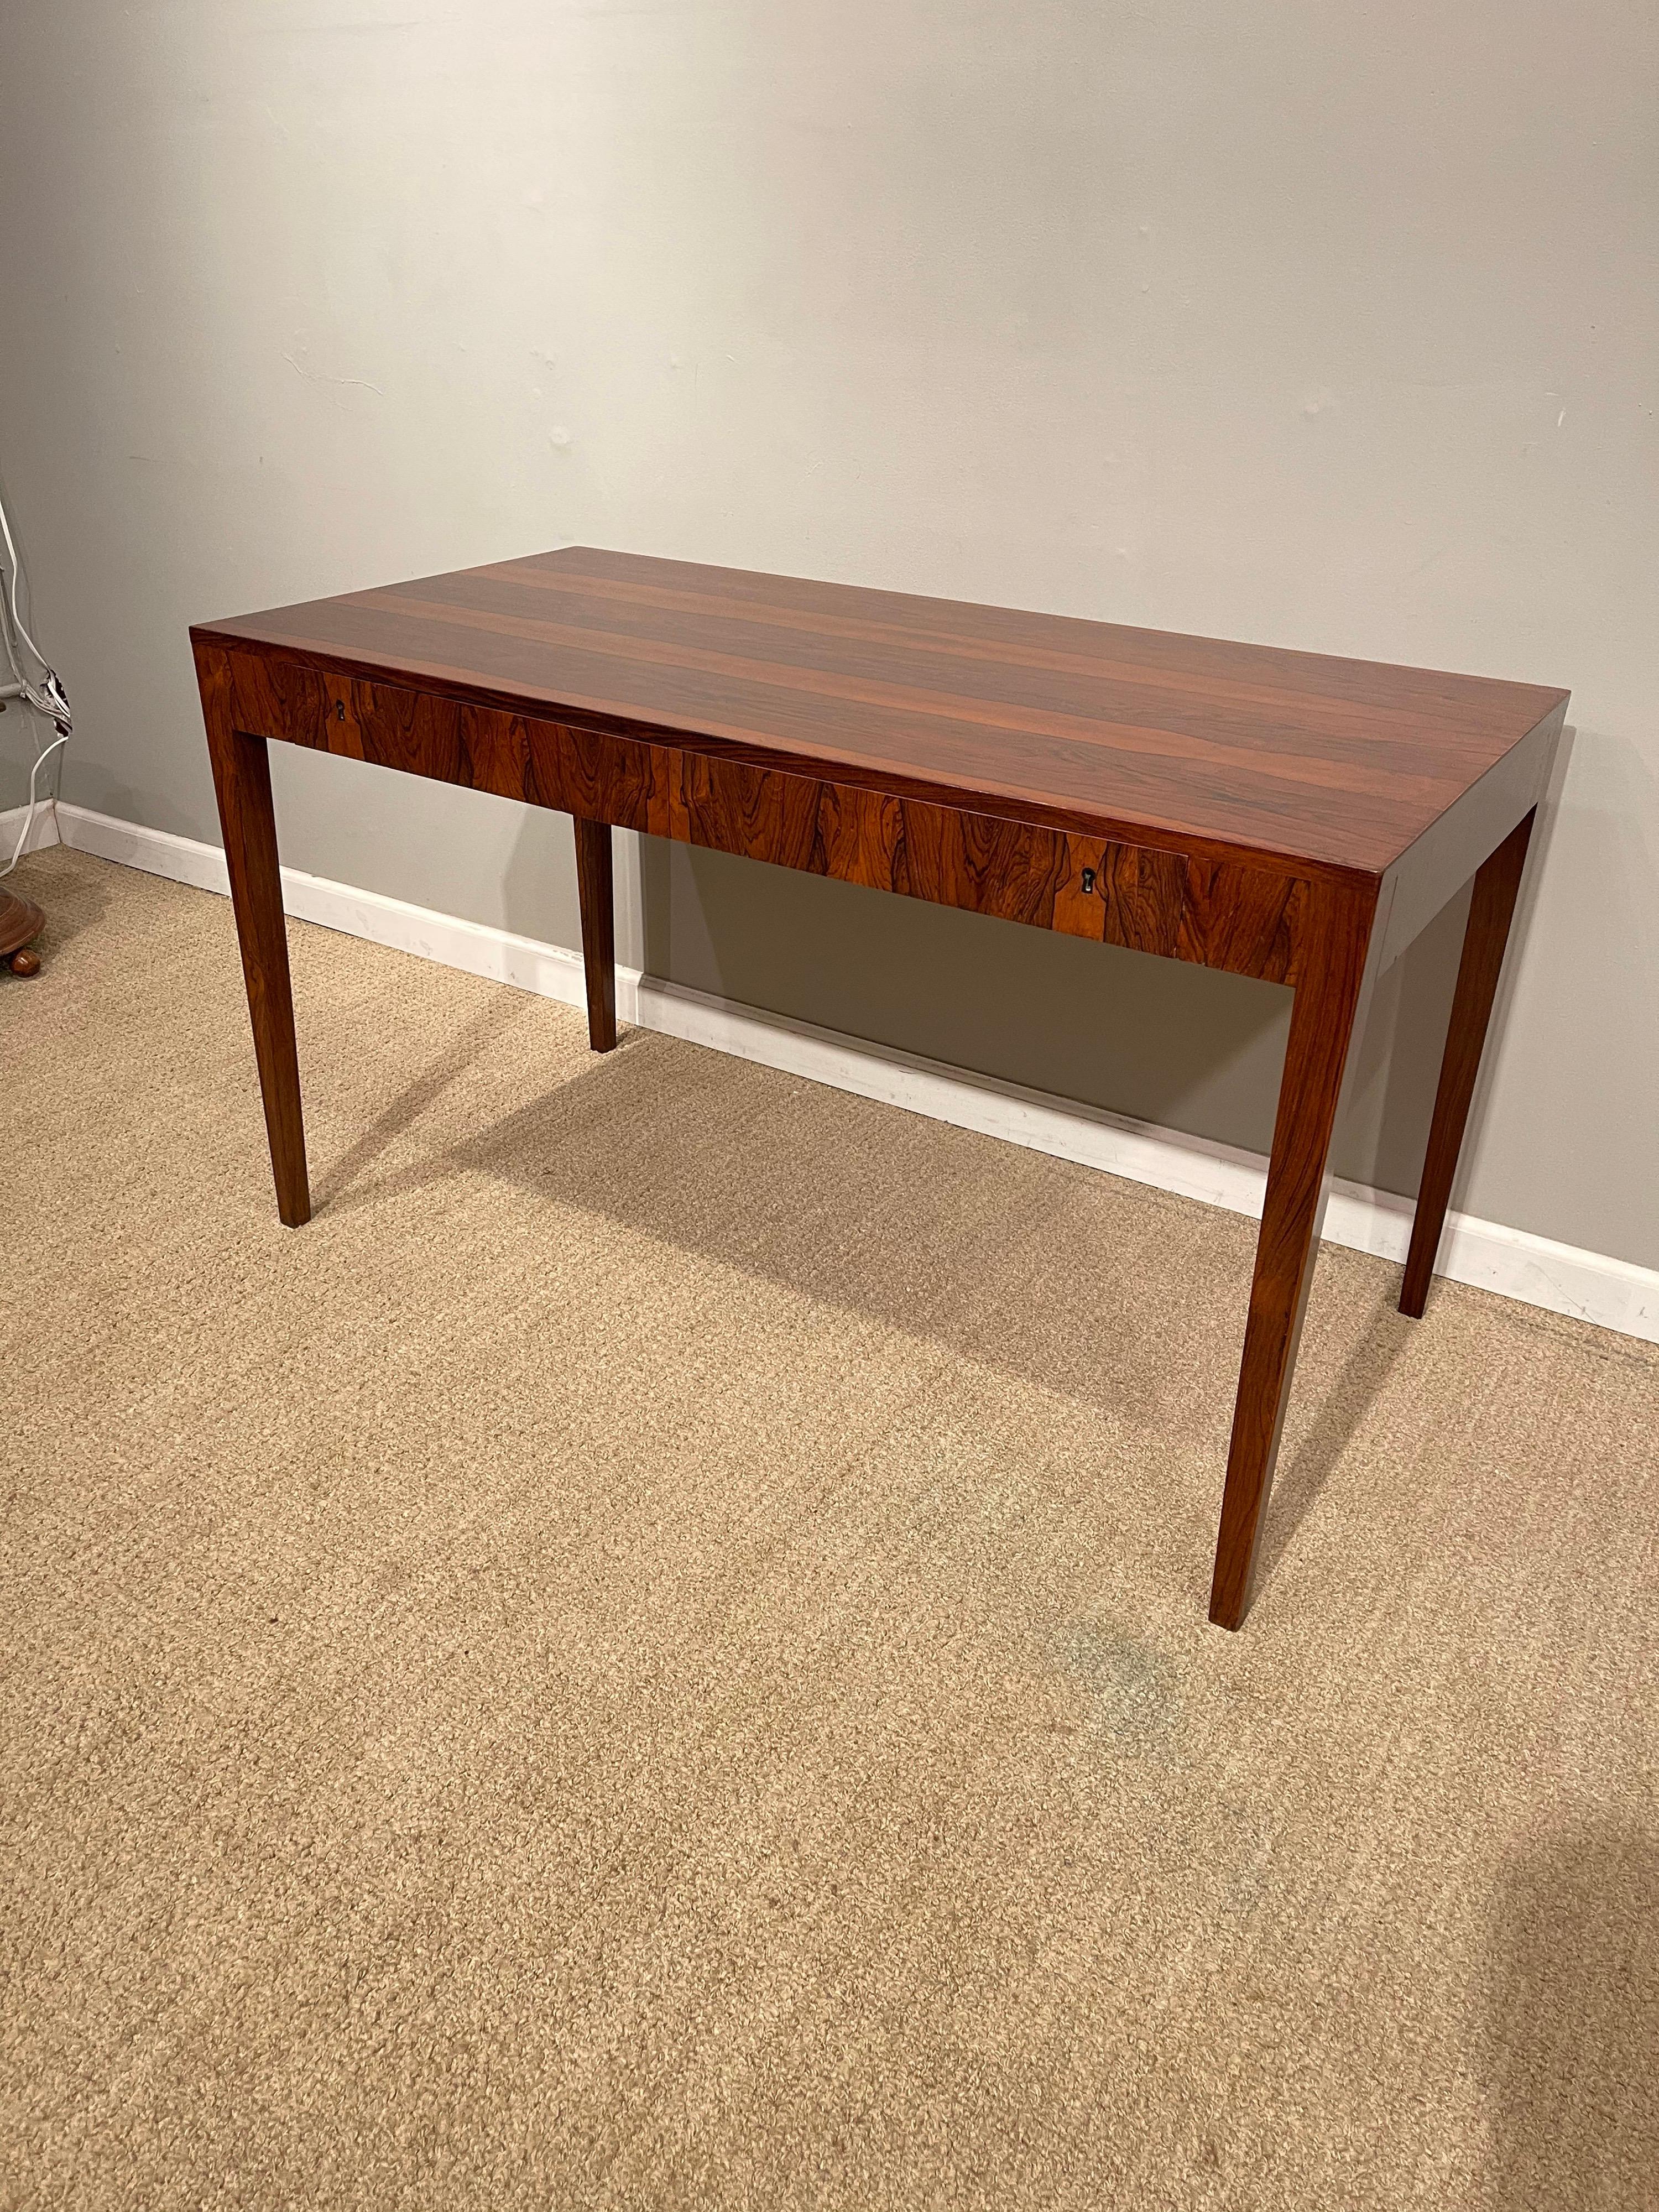 A Rosewood Danish modern writing table, by Riis Antonsen with 2 drawers, 1 key.